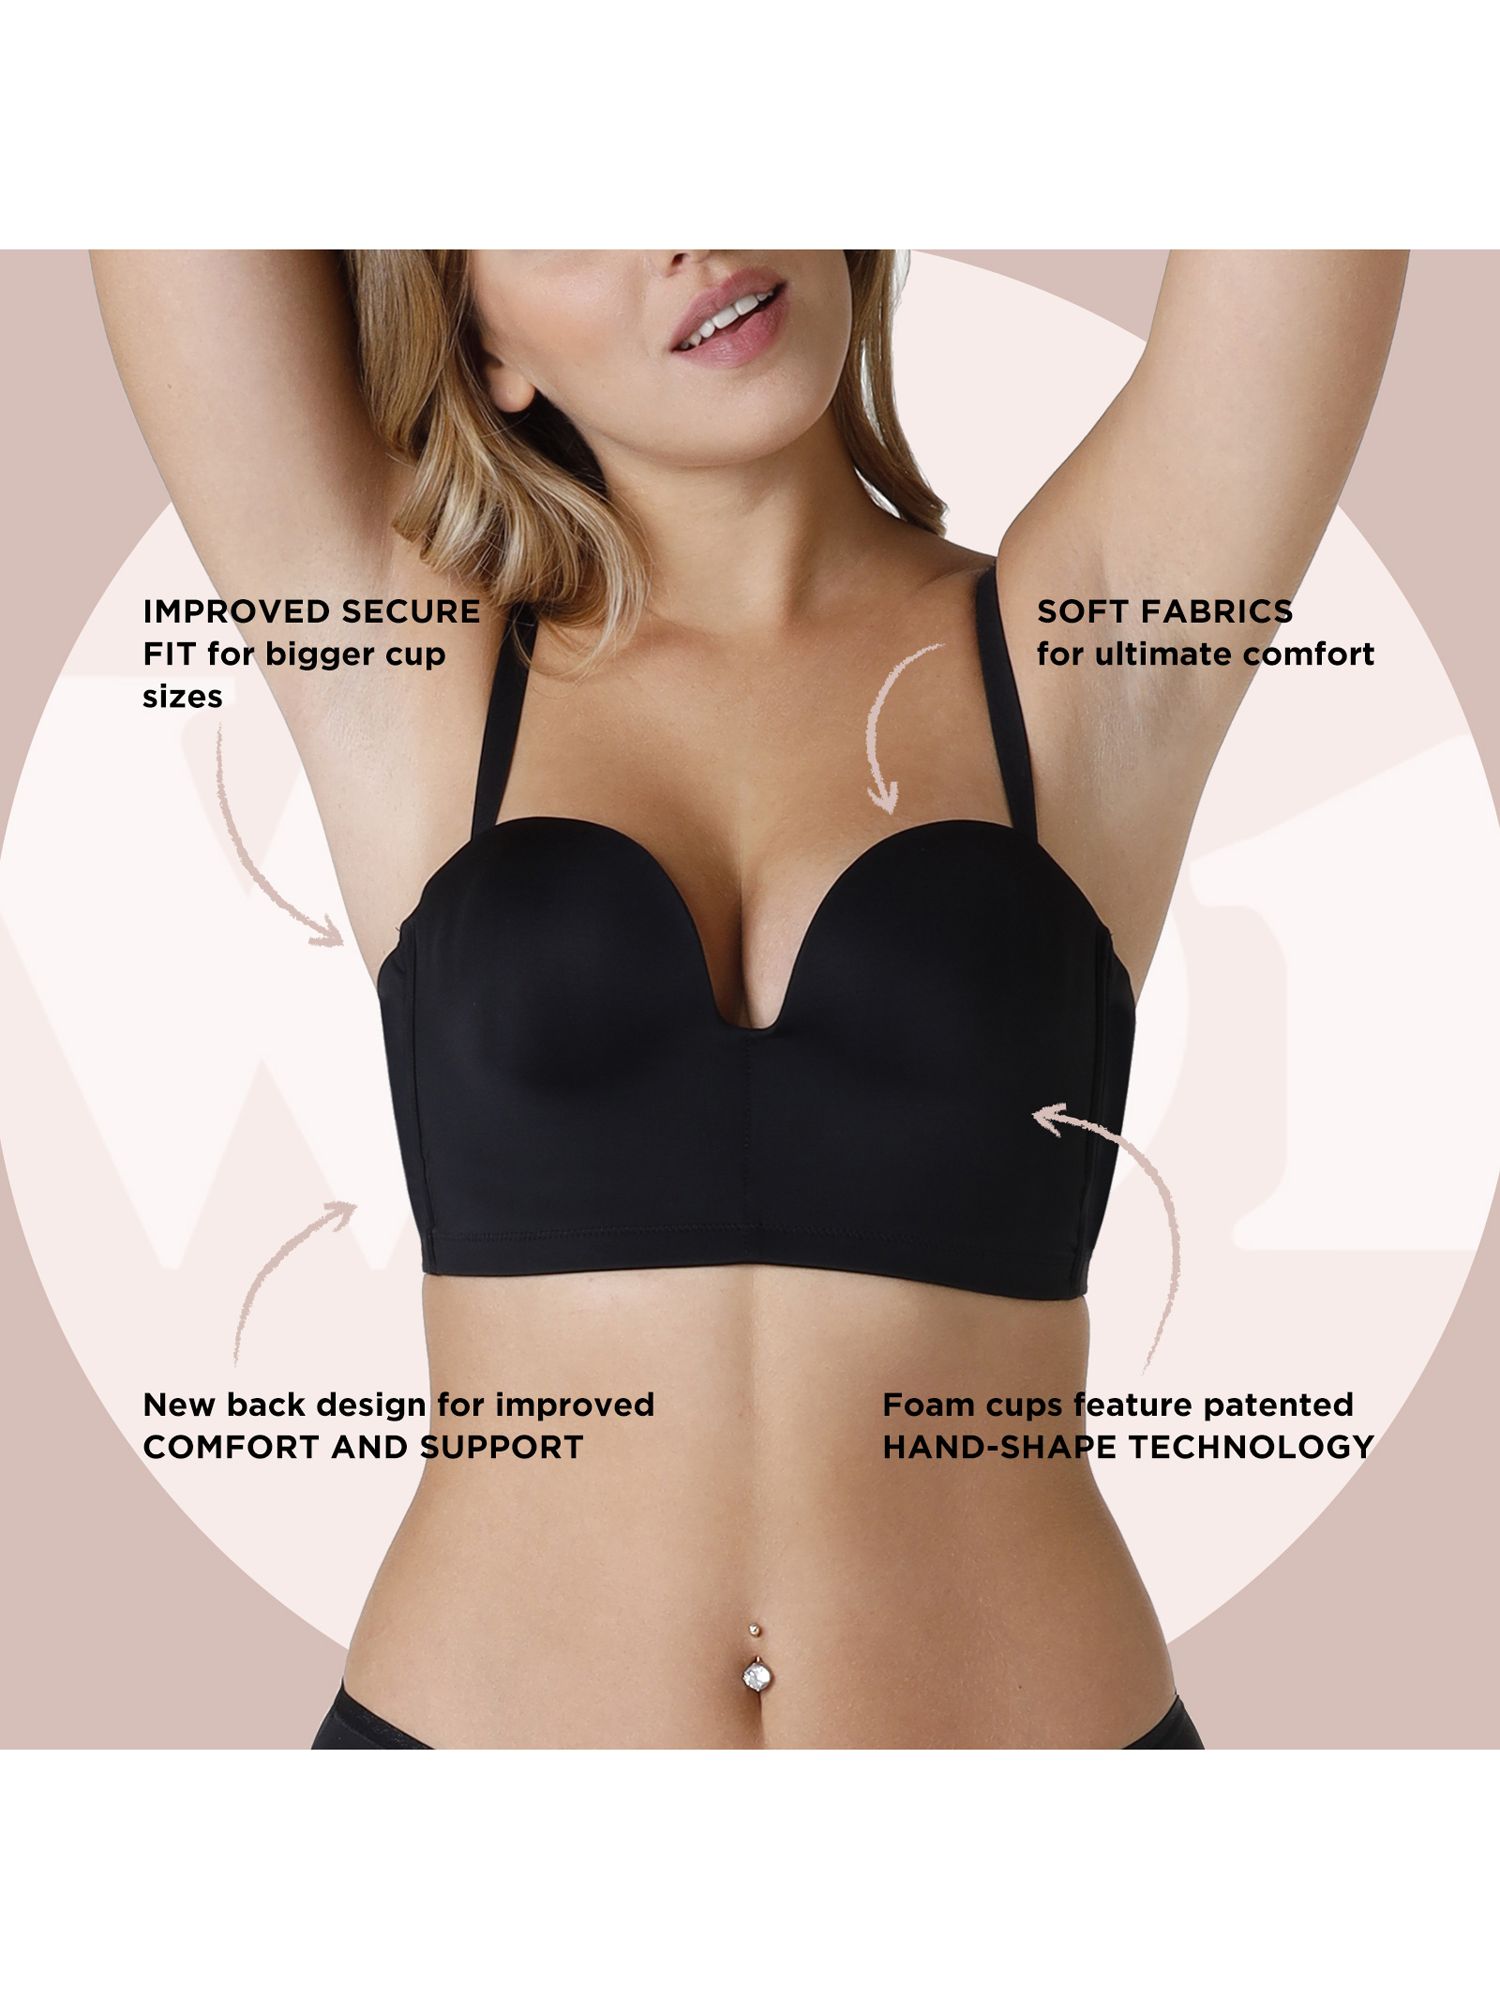 Wonderbra - 'the star of the show! The brand new Ultimate Backless bra  is made from soft, breathable fabric in black or nude, with an adjustable low  back strap and just the